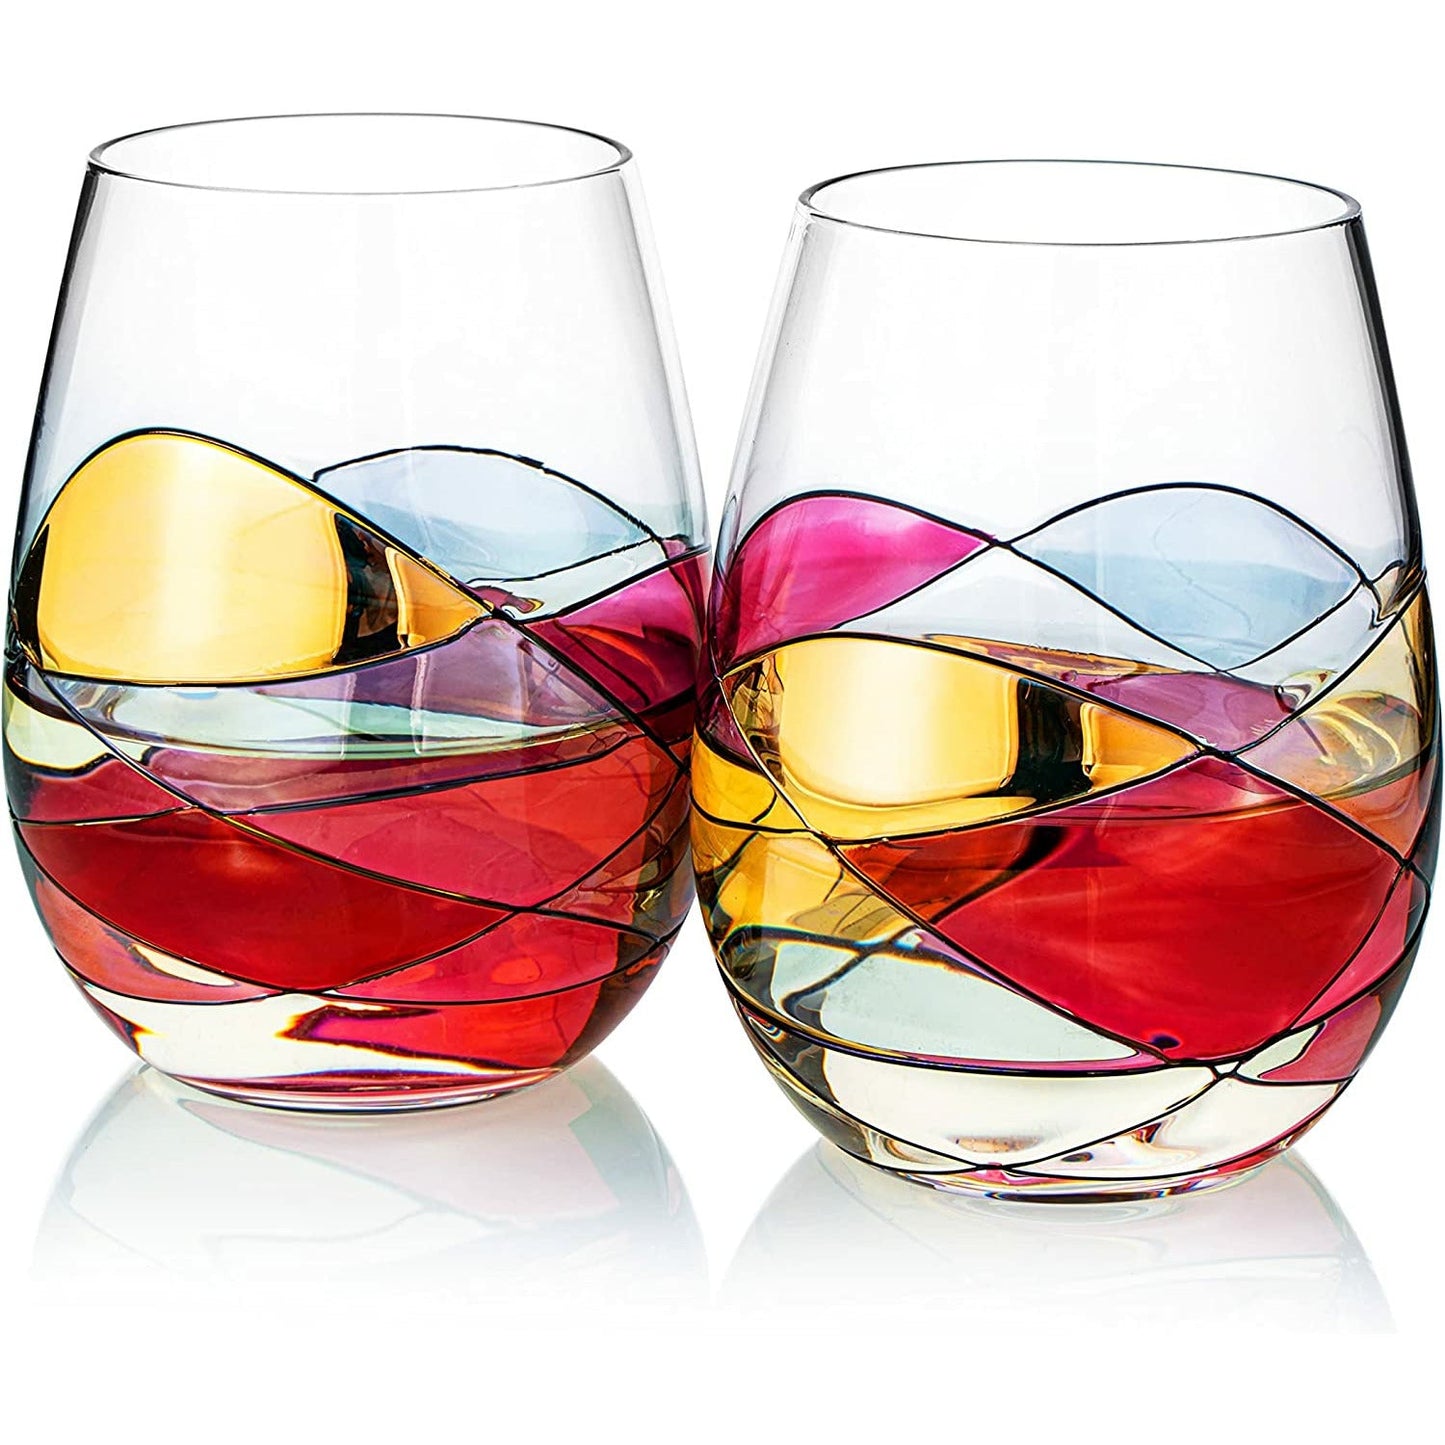 The Wine Savant - Artisanal Hand-Painted Stemless - Renaissance Stained Glass Window Design - Set of 2